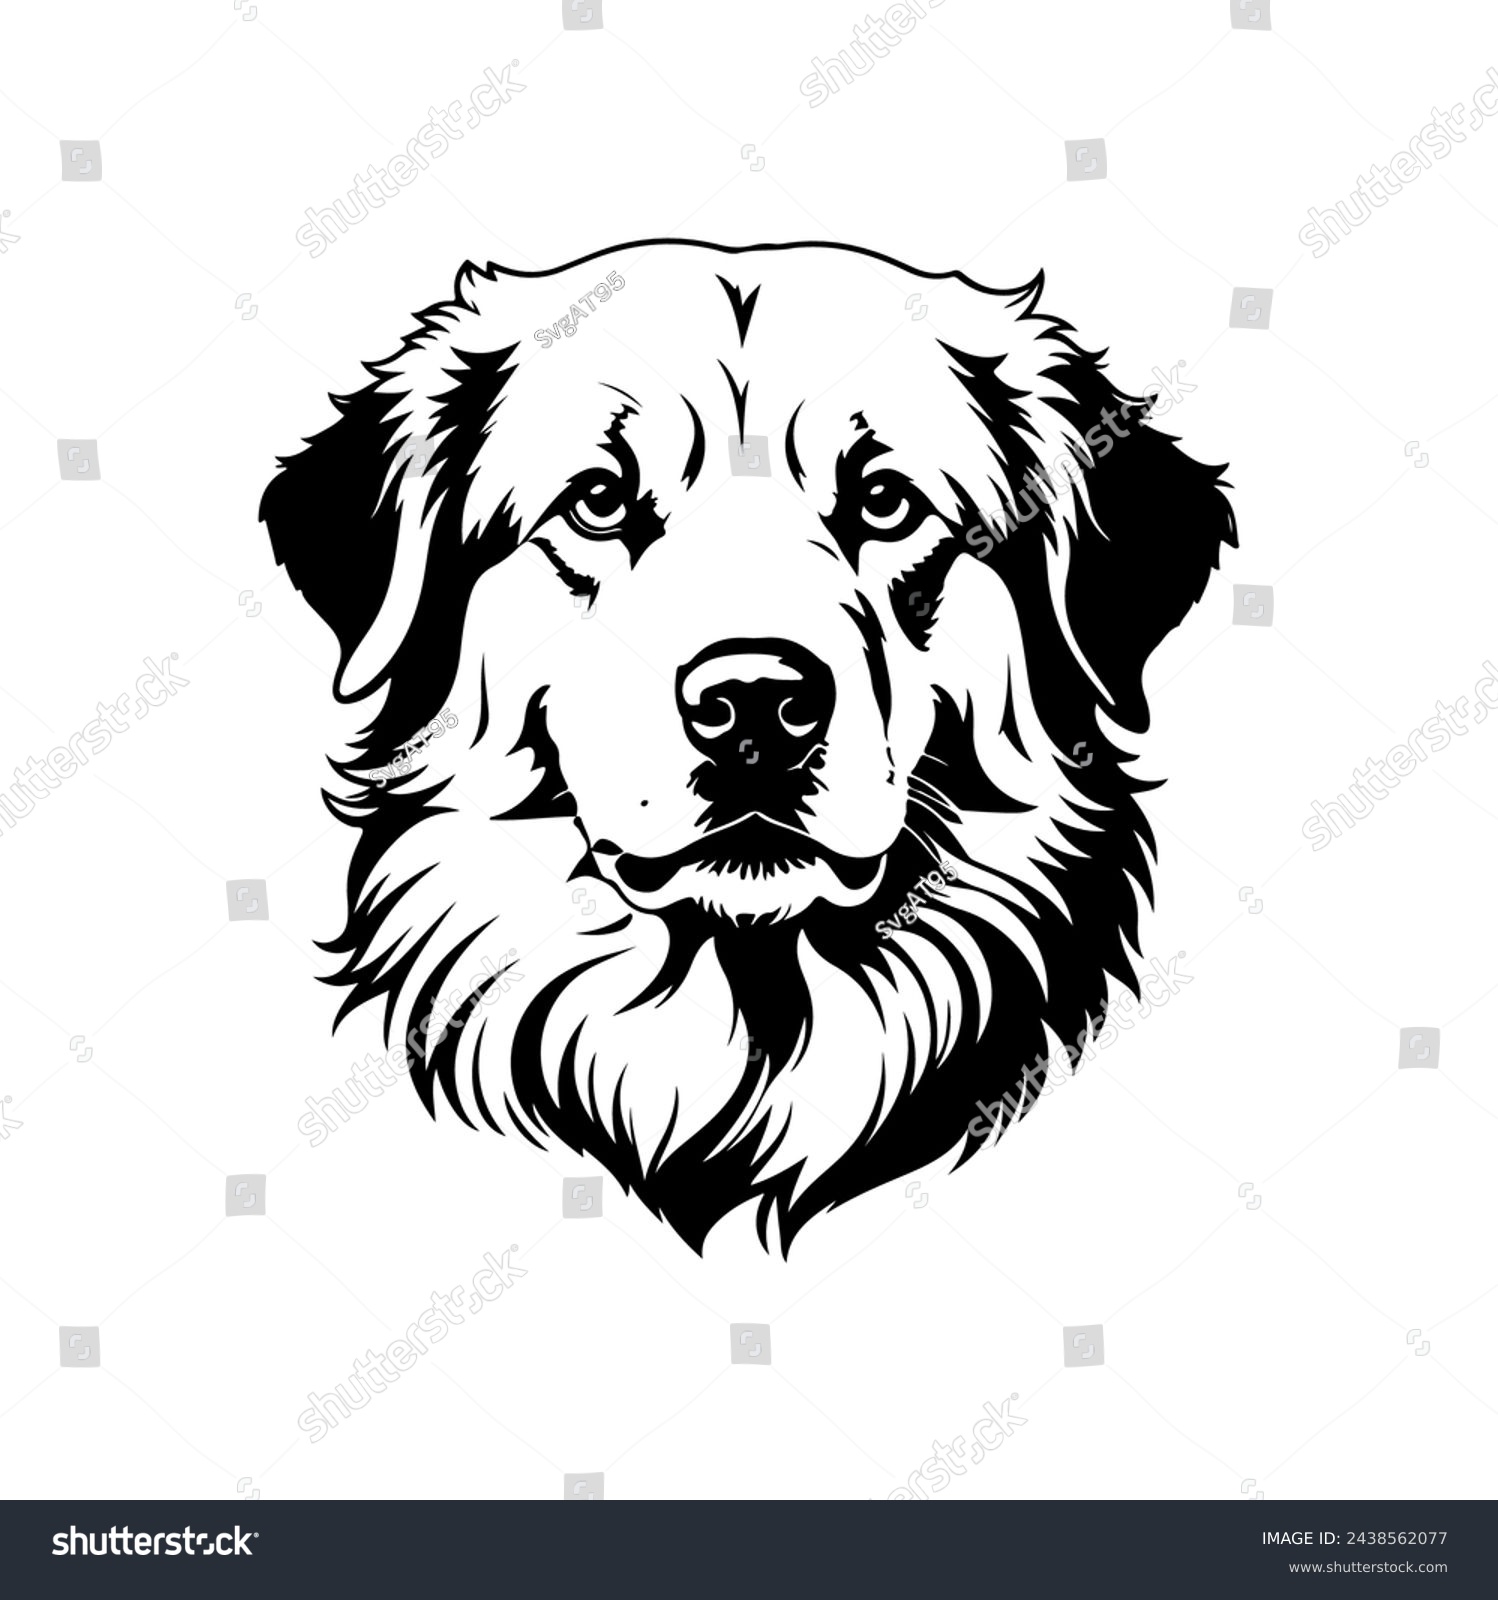 SVG of Portrait of a Great Pyrenees Dog Vector isolated on white background, Dog Silhouettes. svg